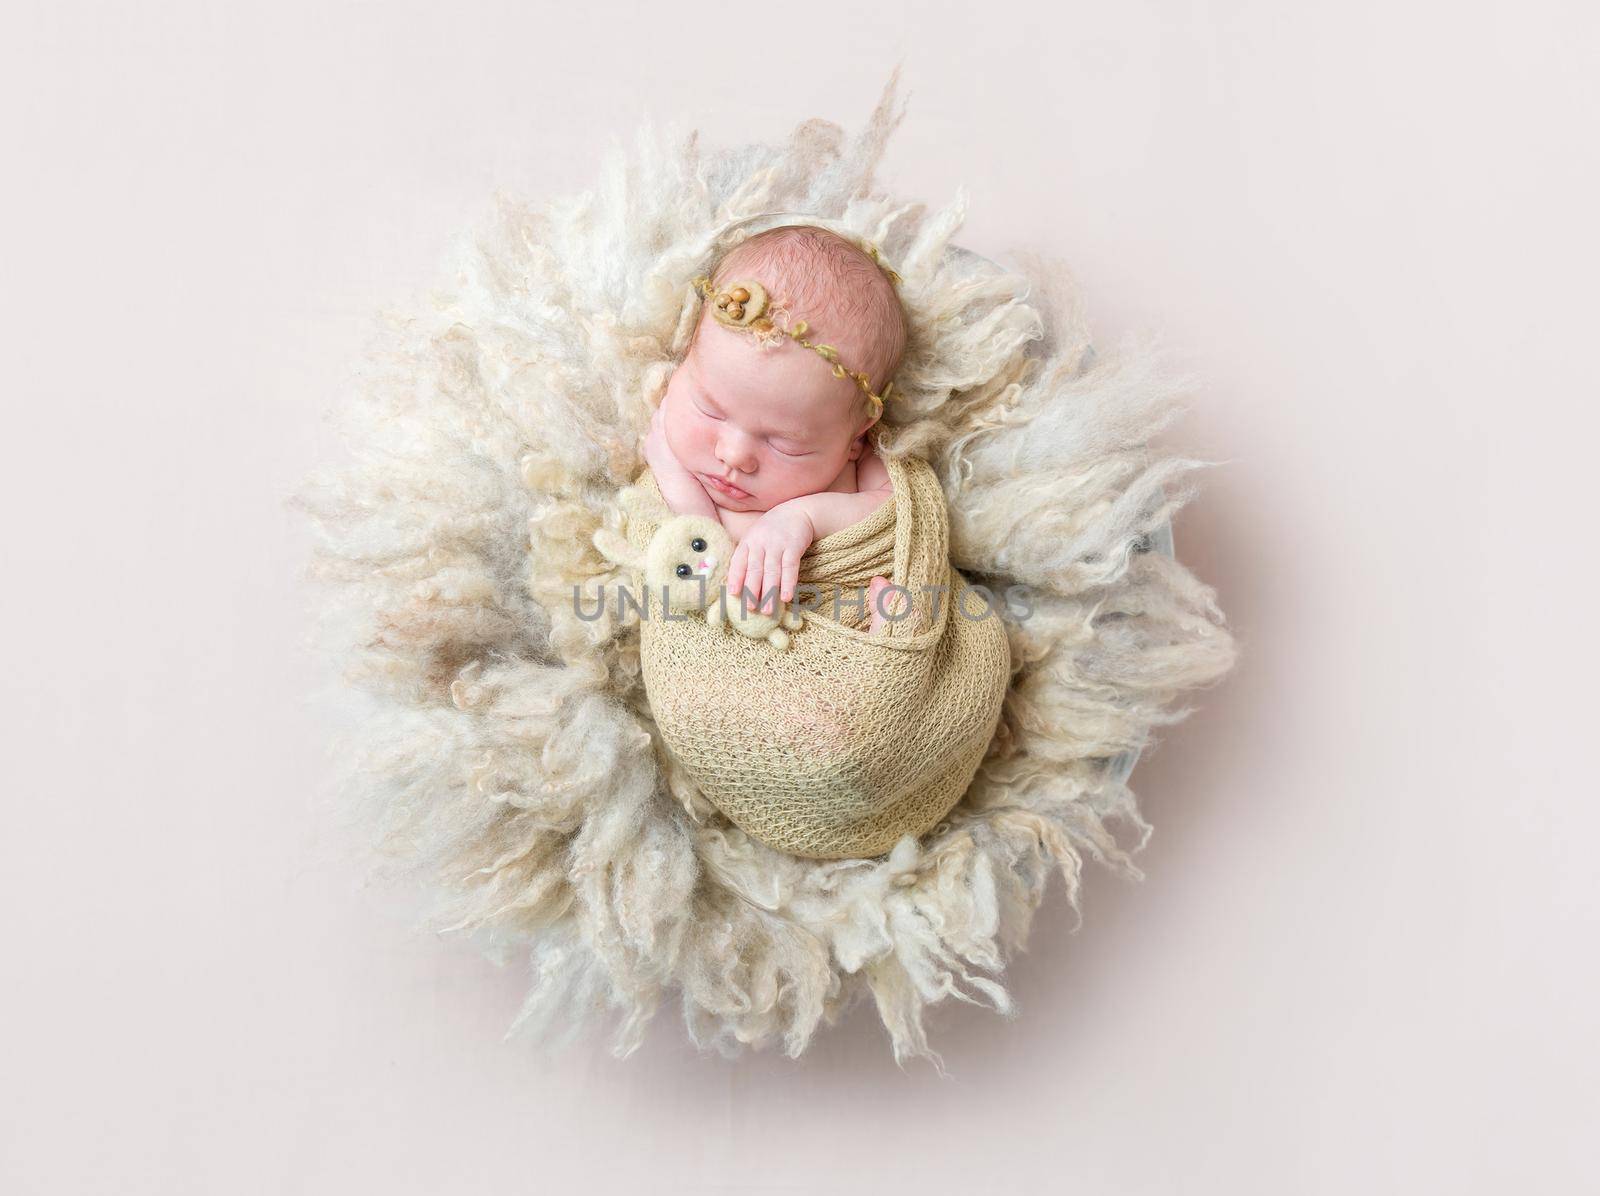 infant sleeping swaddled with rabbit toy, topview by tan4ikk1